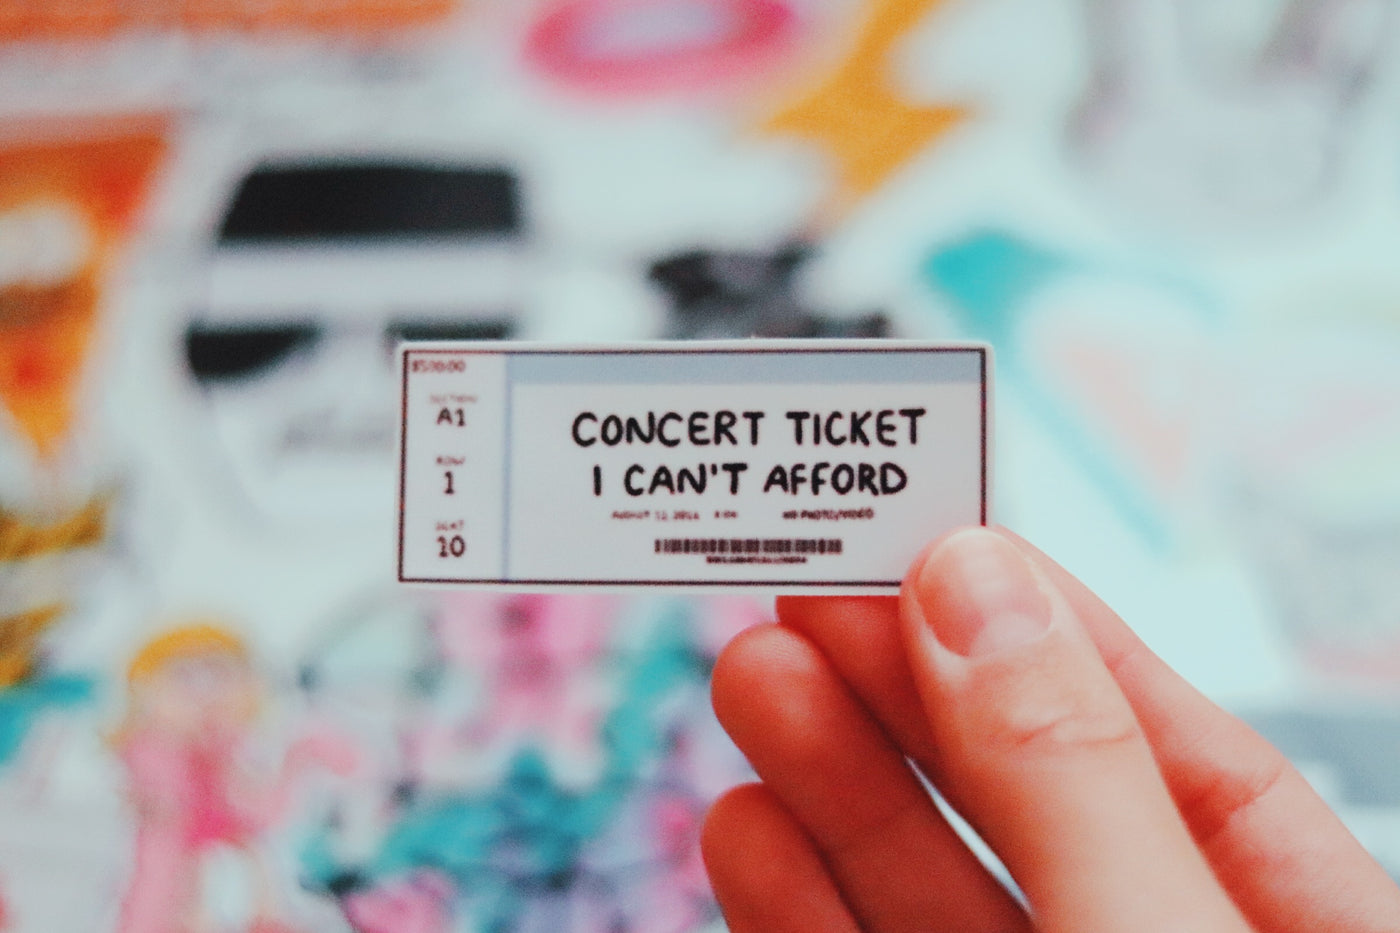 Concert ticket I can't afford